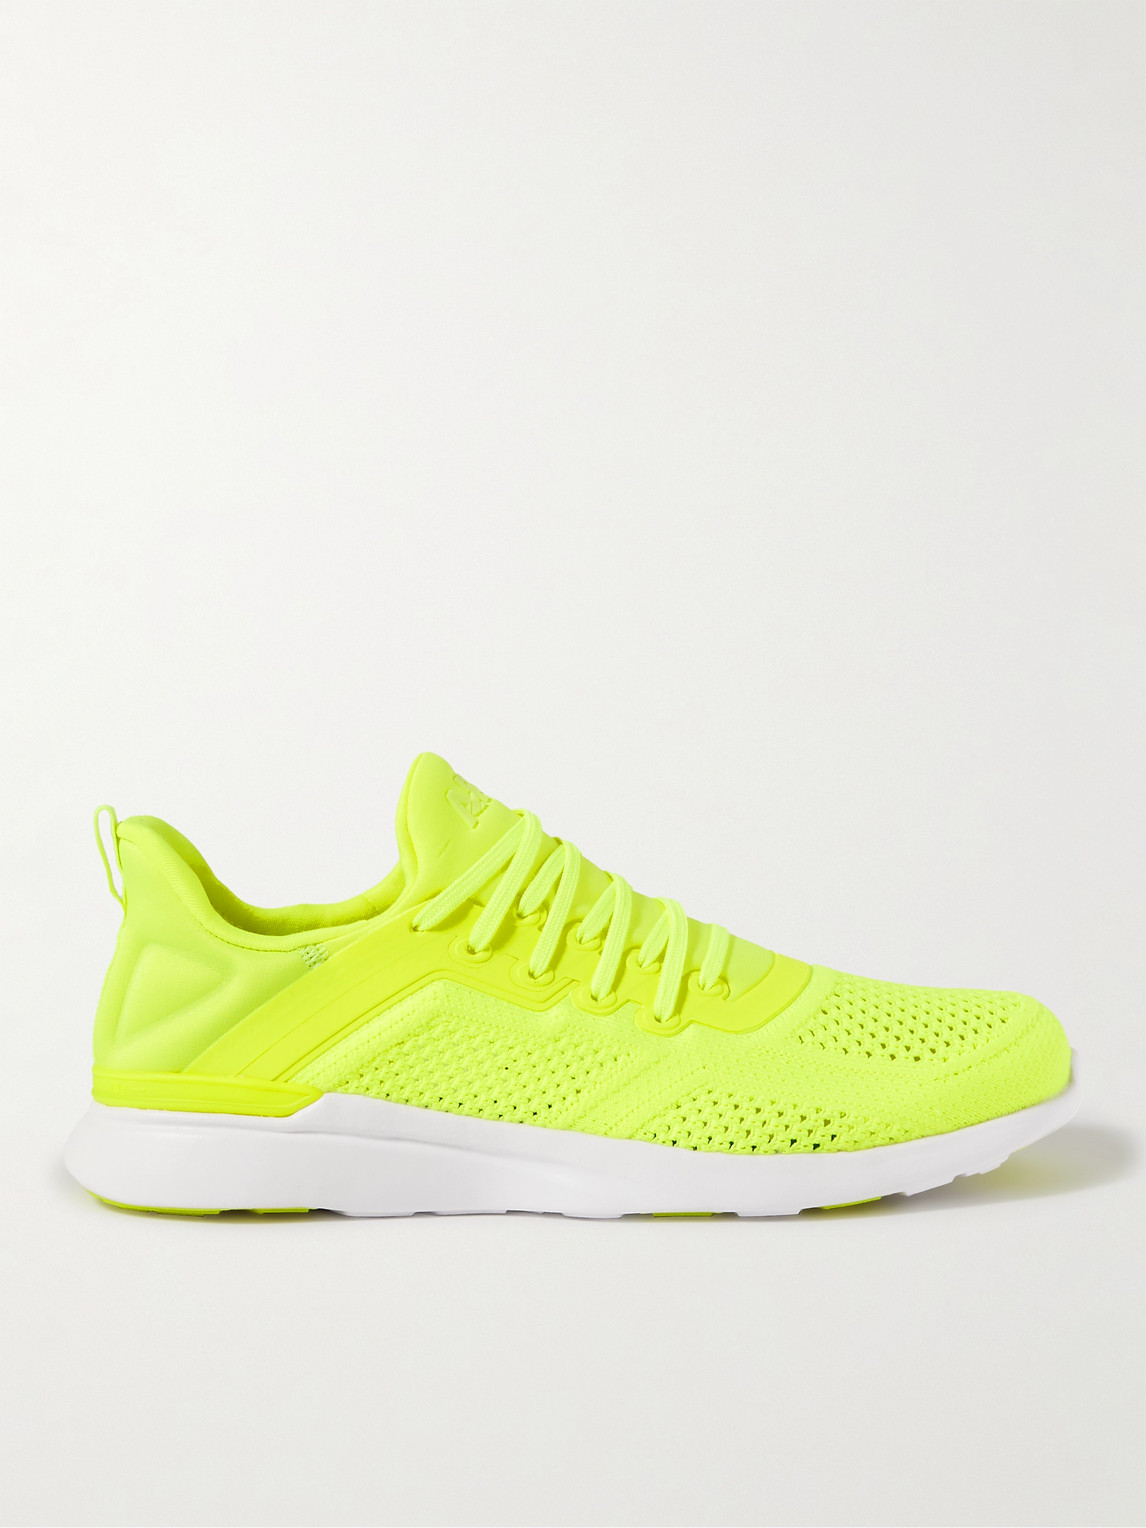 APL ATHLETIC PROPULSION LABS TRACER NEON TECHLOOM AND NEOPRENE RUNNING SNEAKERS